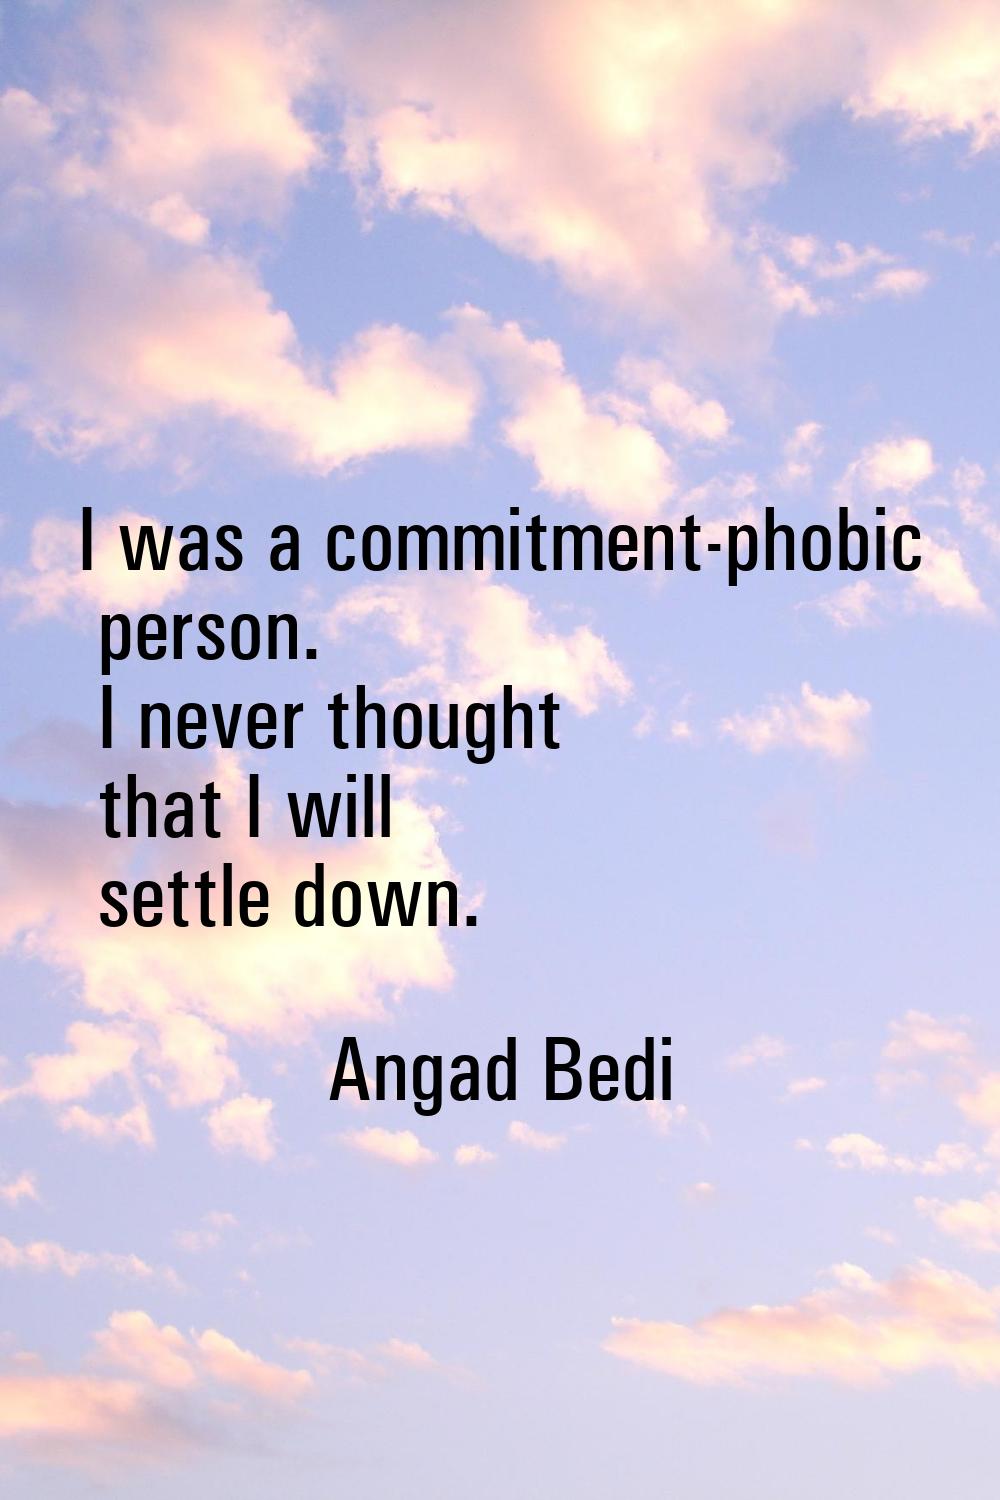 I was a commitment-phobic person. I never thought that I will settle down.